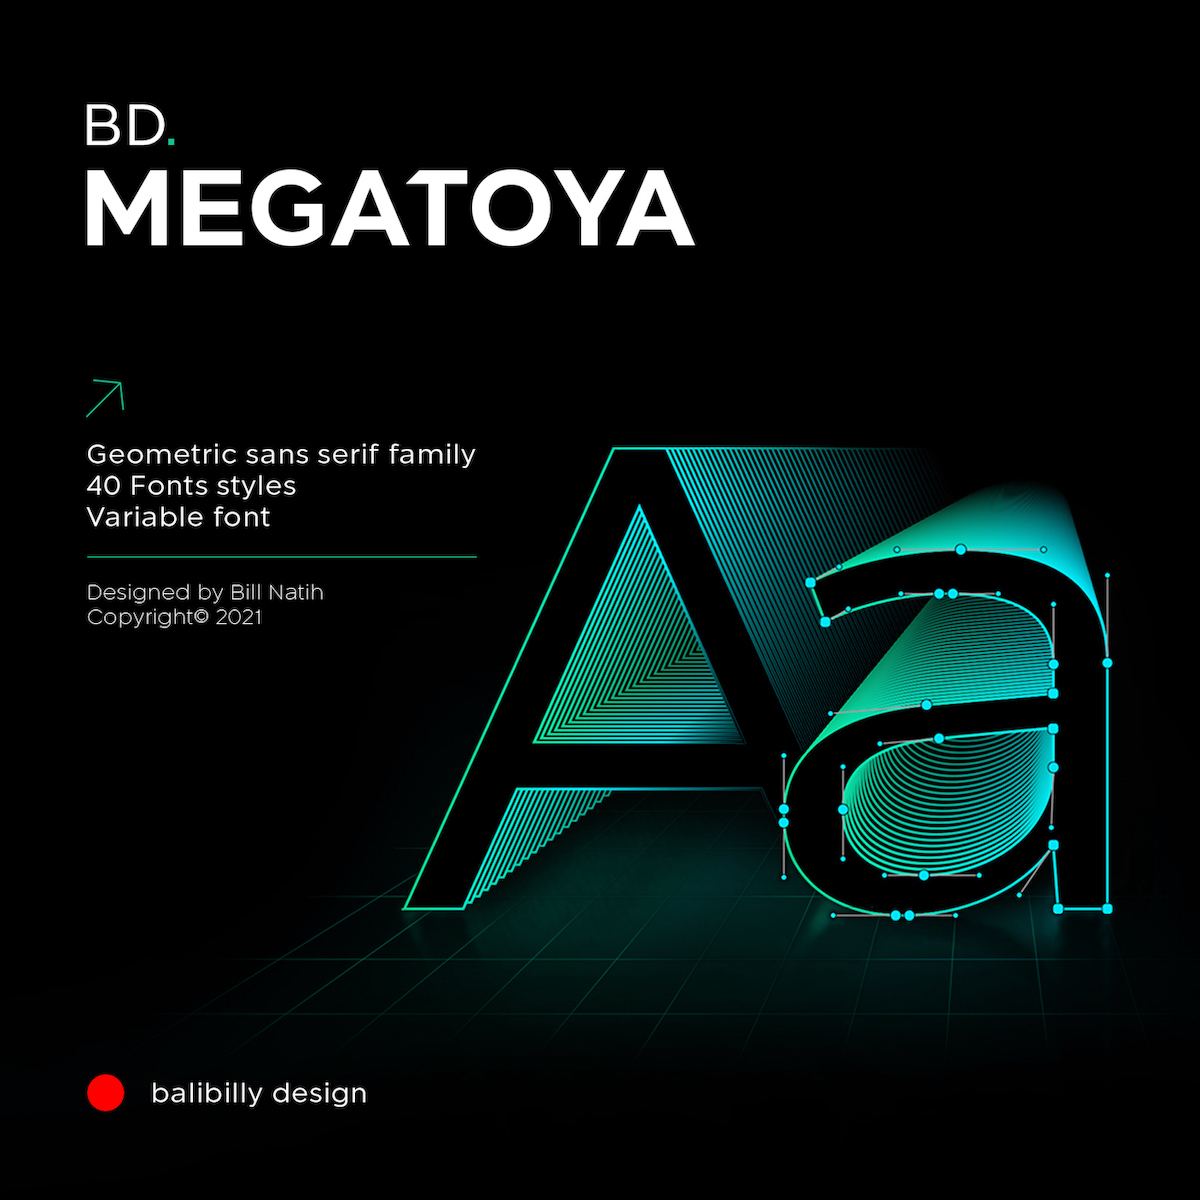 BD Megatoya, a new font from Balibilly Design.